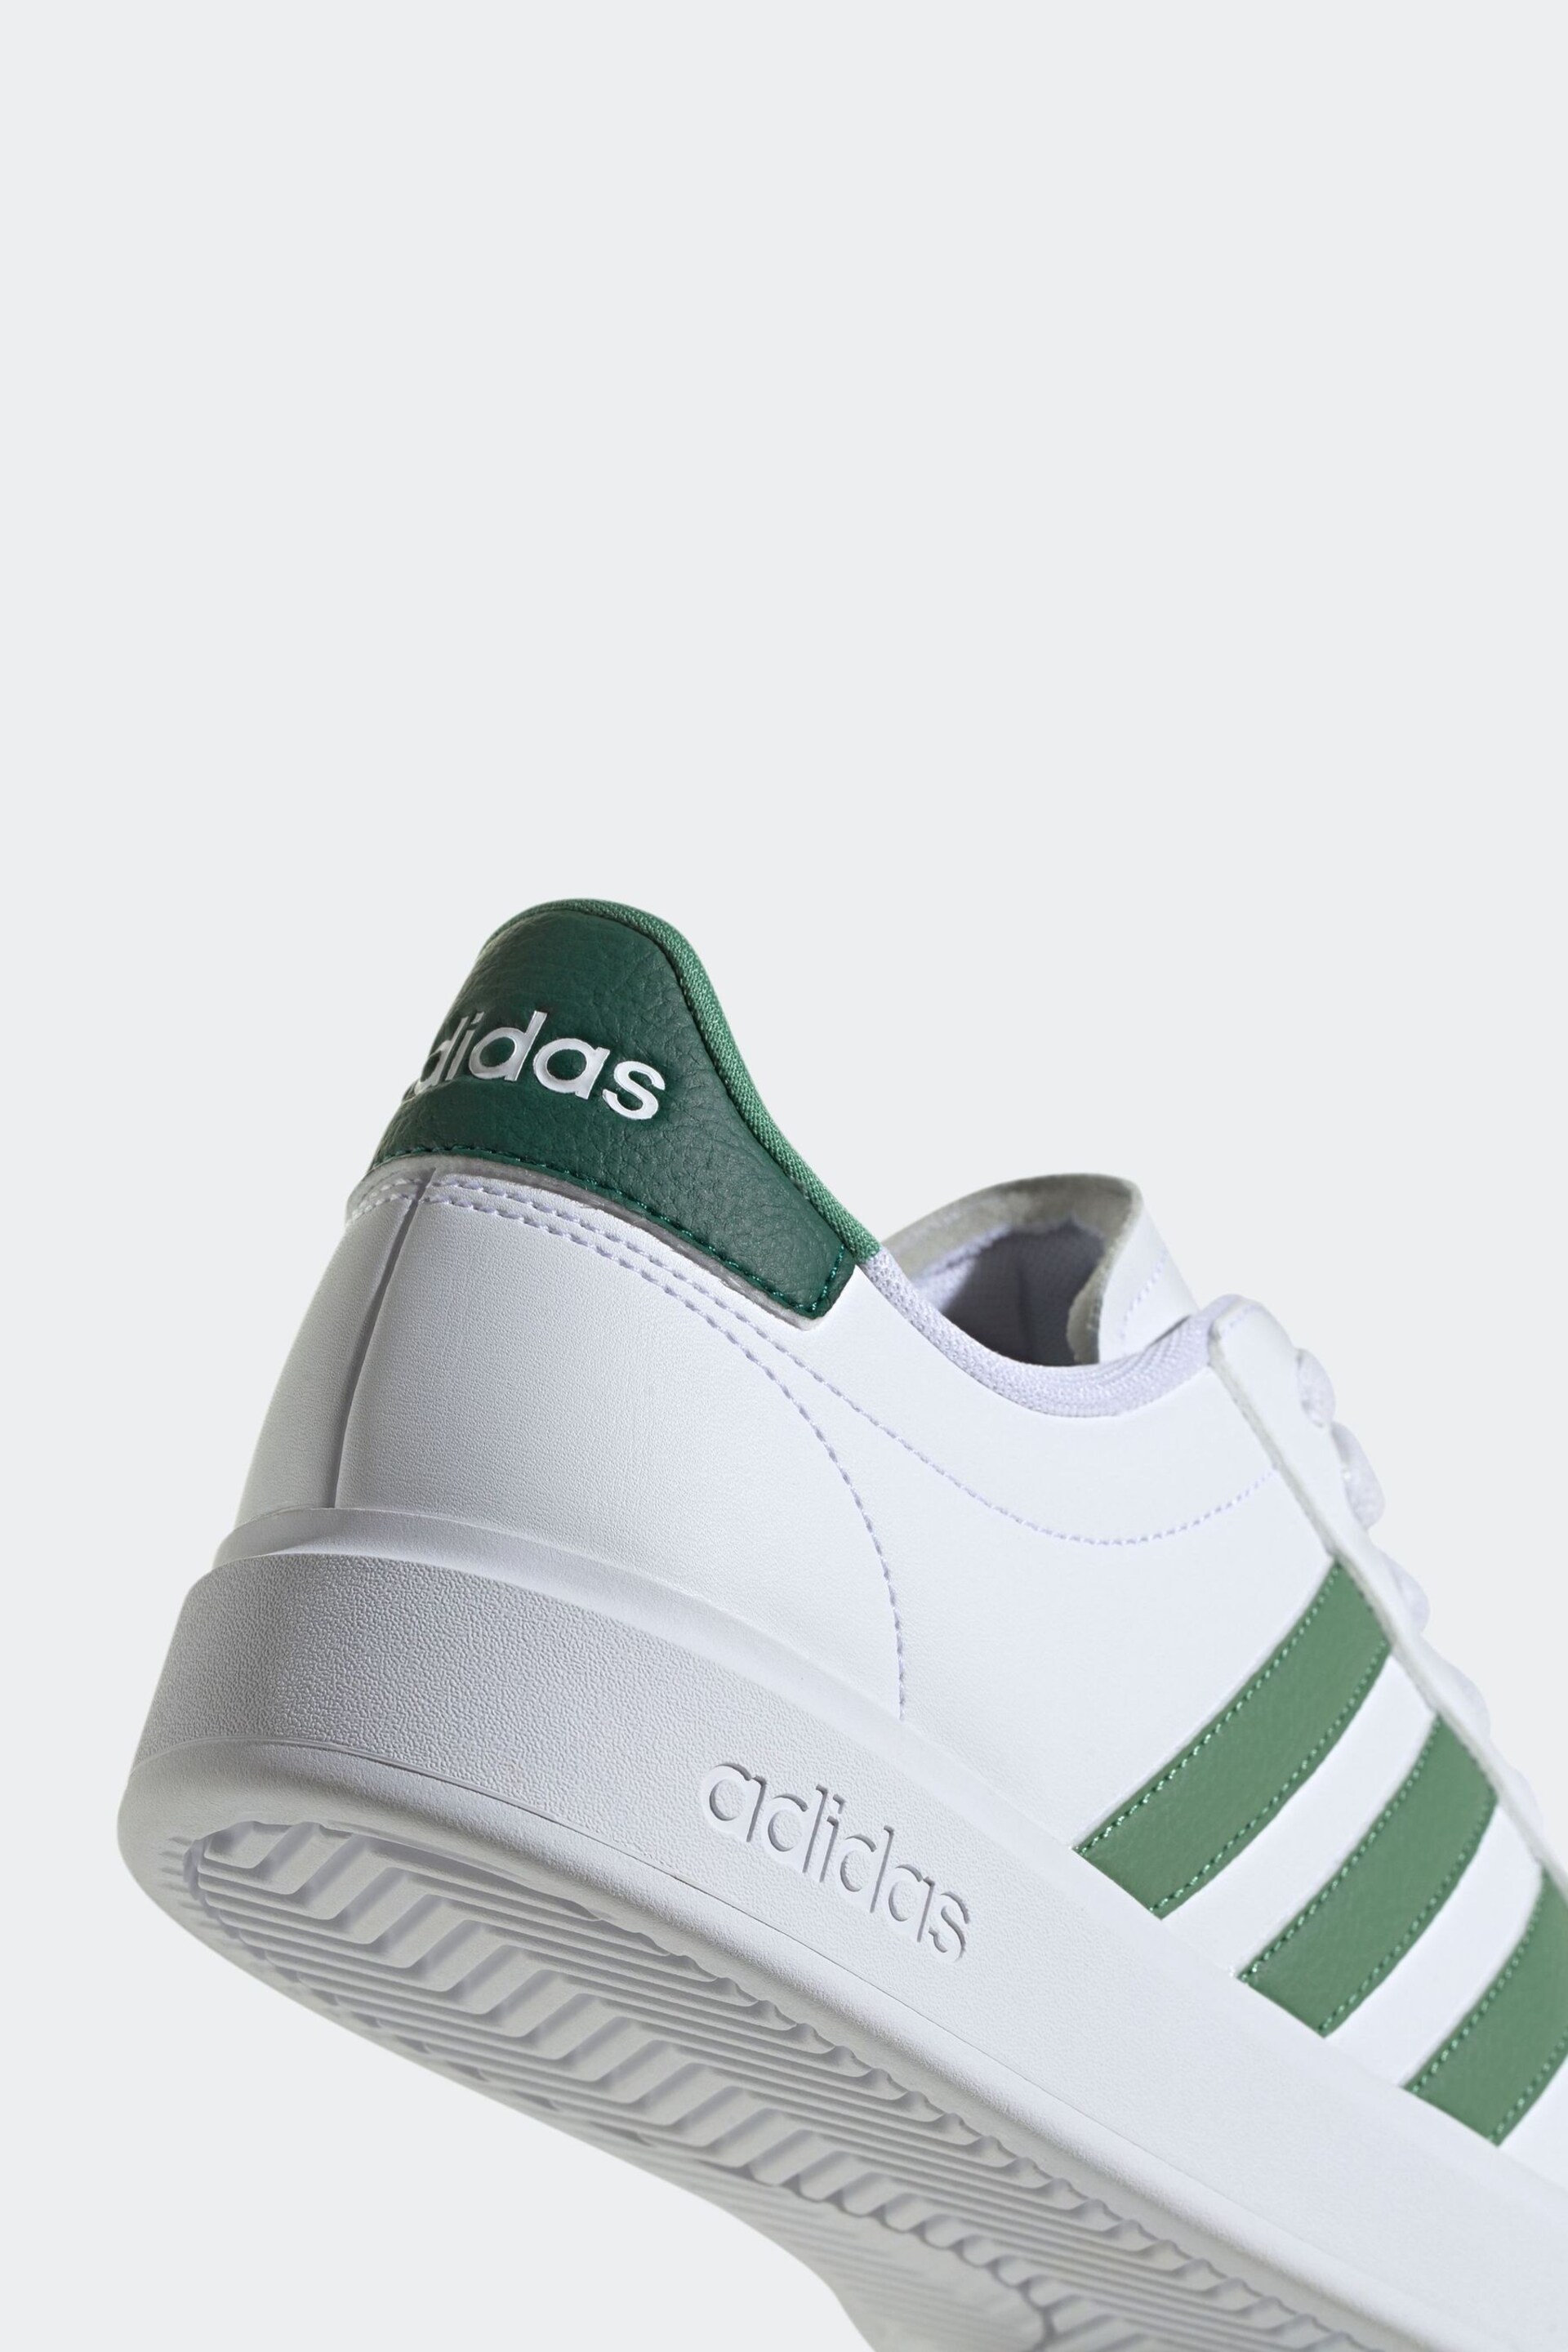 adidas Green White Sportswear Grand Court 2.0 Trainers - Image 7 of 7